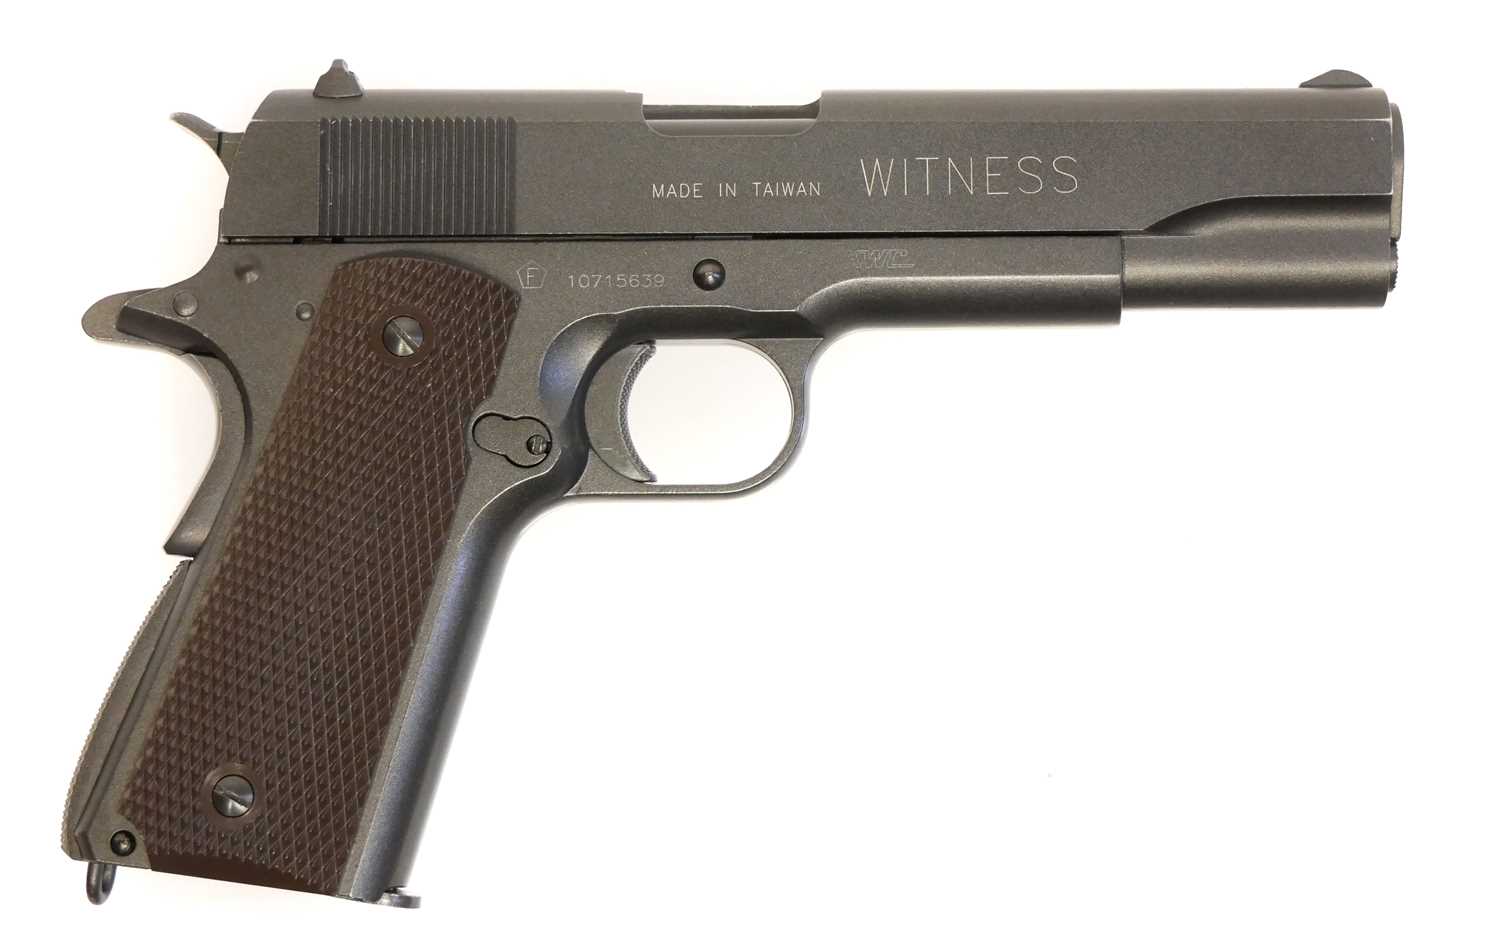 Tanfoglio Witness 1911 .177 air pistol, serial number 10715639, with box and instructions. No